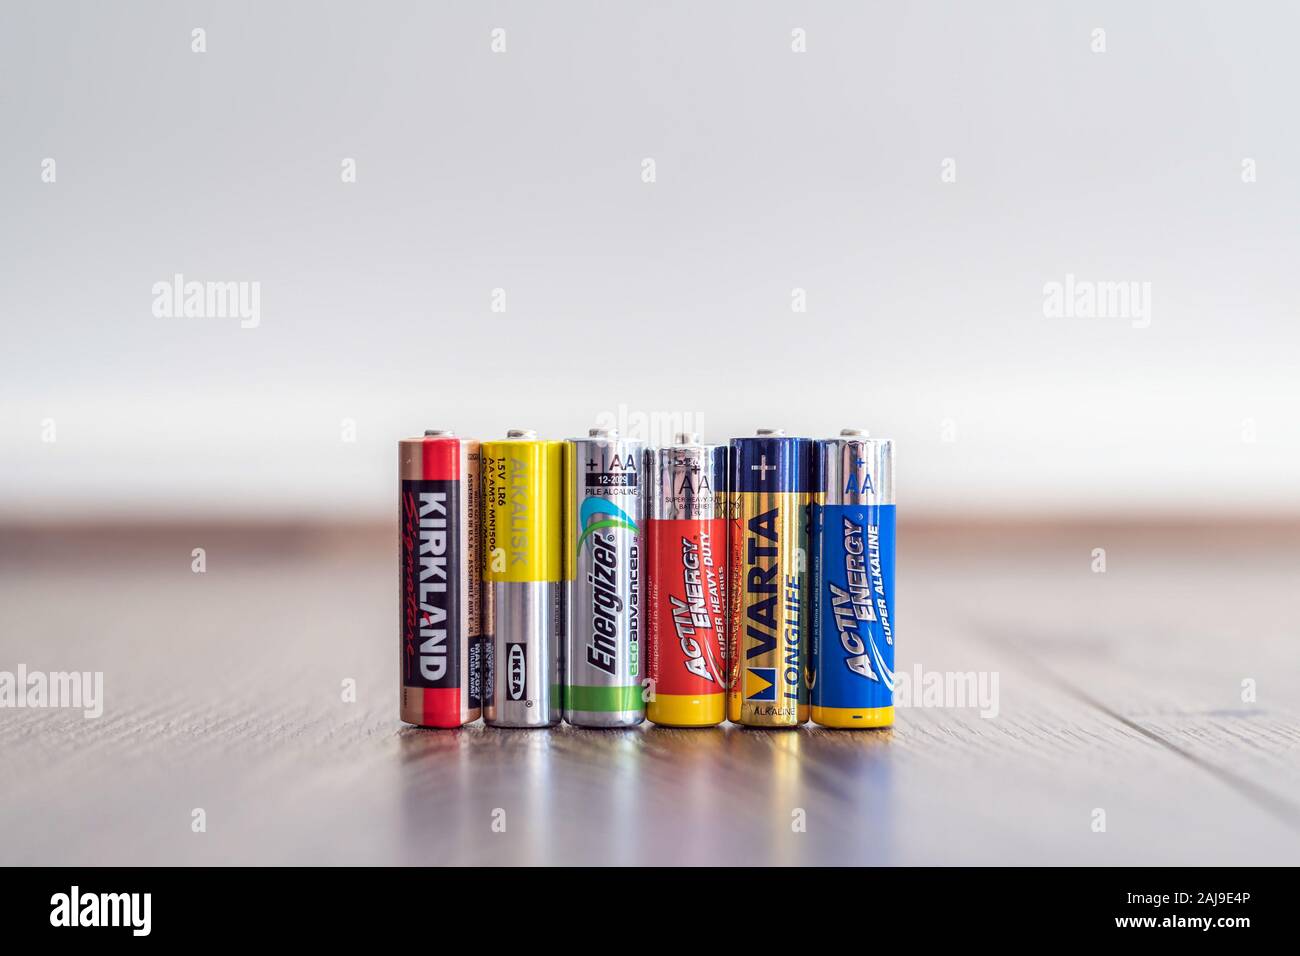 Adelaide, Australia - July 7, 2019: Assortment of most common AA batteries  that are sold on Australian market lined up in a row for comparison Stock  Photo - Alamy